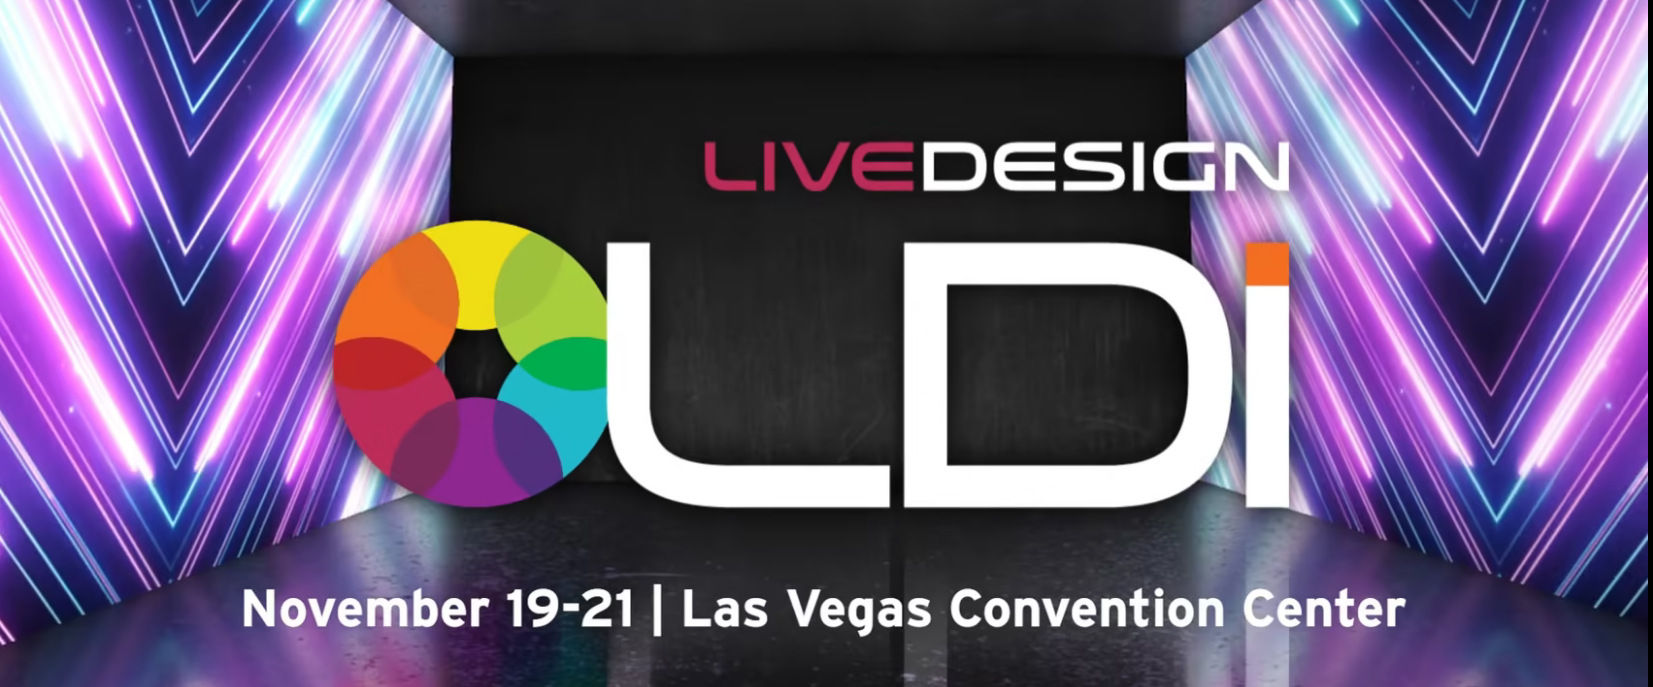 Register Now To Get Your Free LDI2021 Exhibit Hall Pass! Live Design